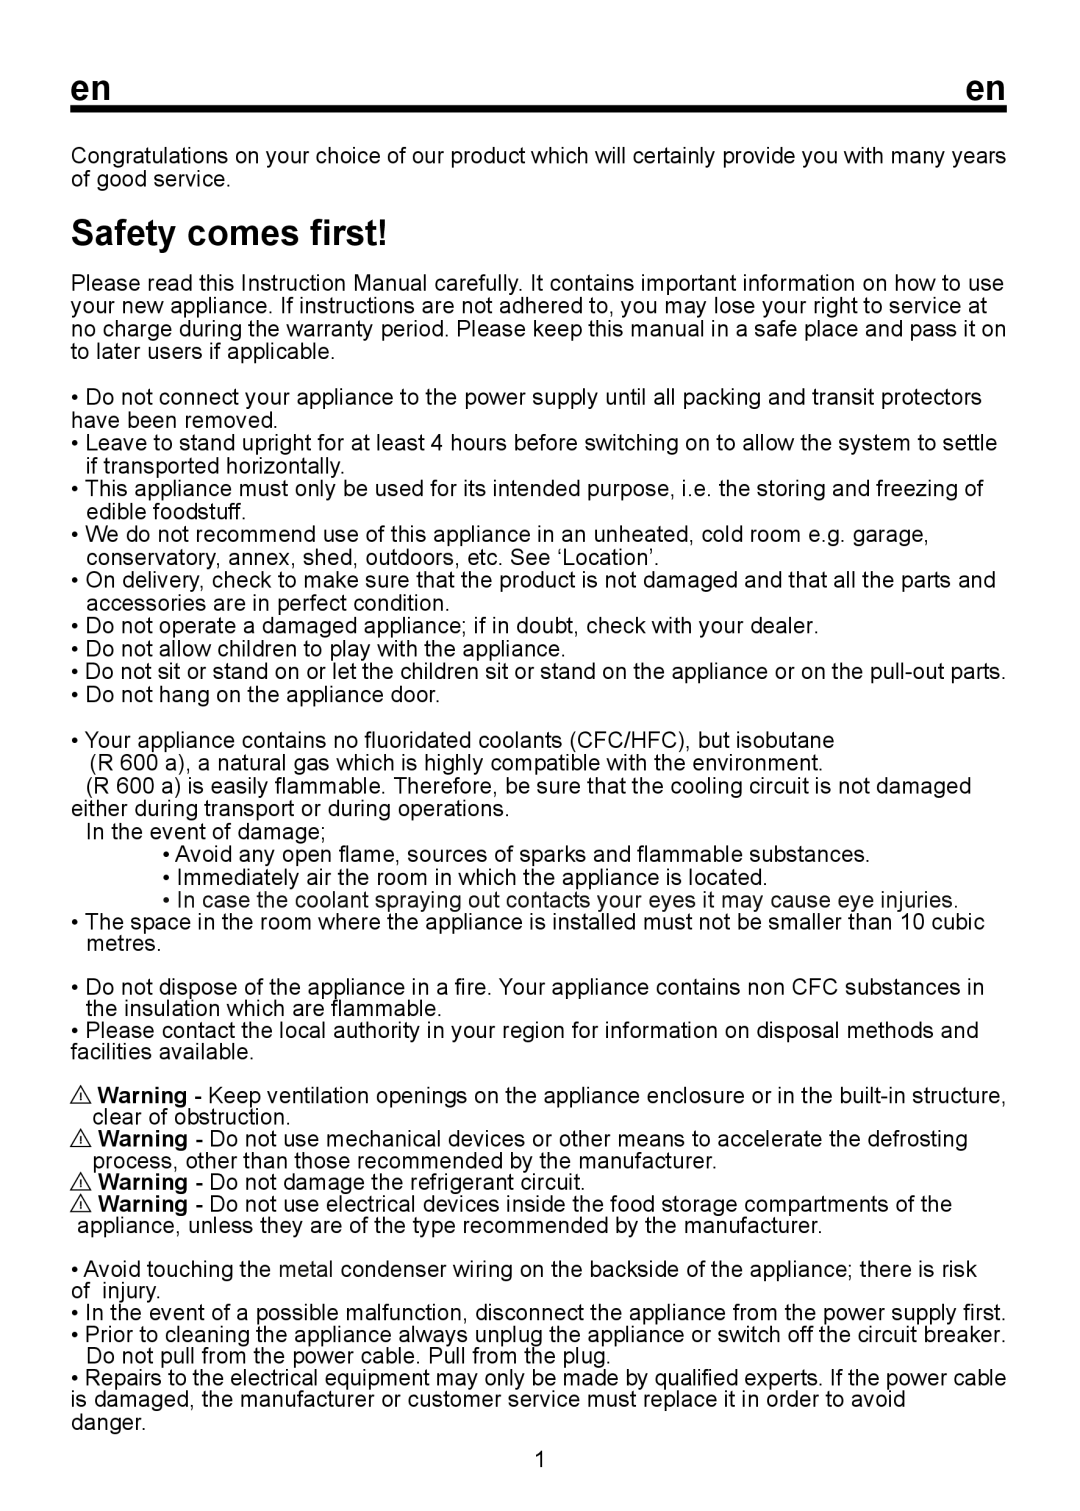 Smeg FD 32 AP instruction manual Safety comes first 